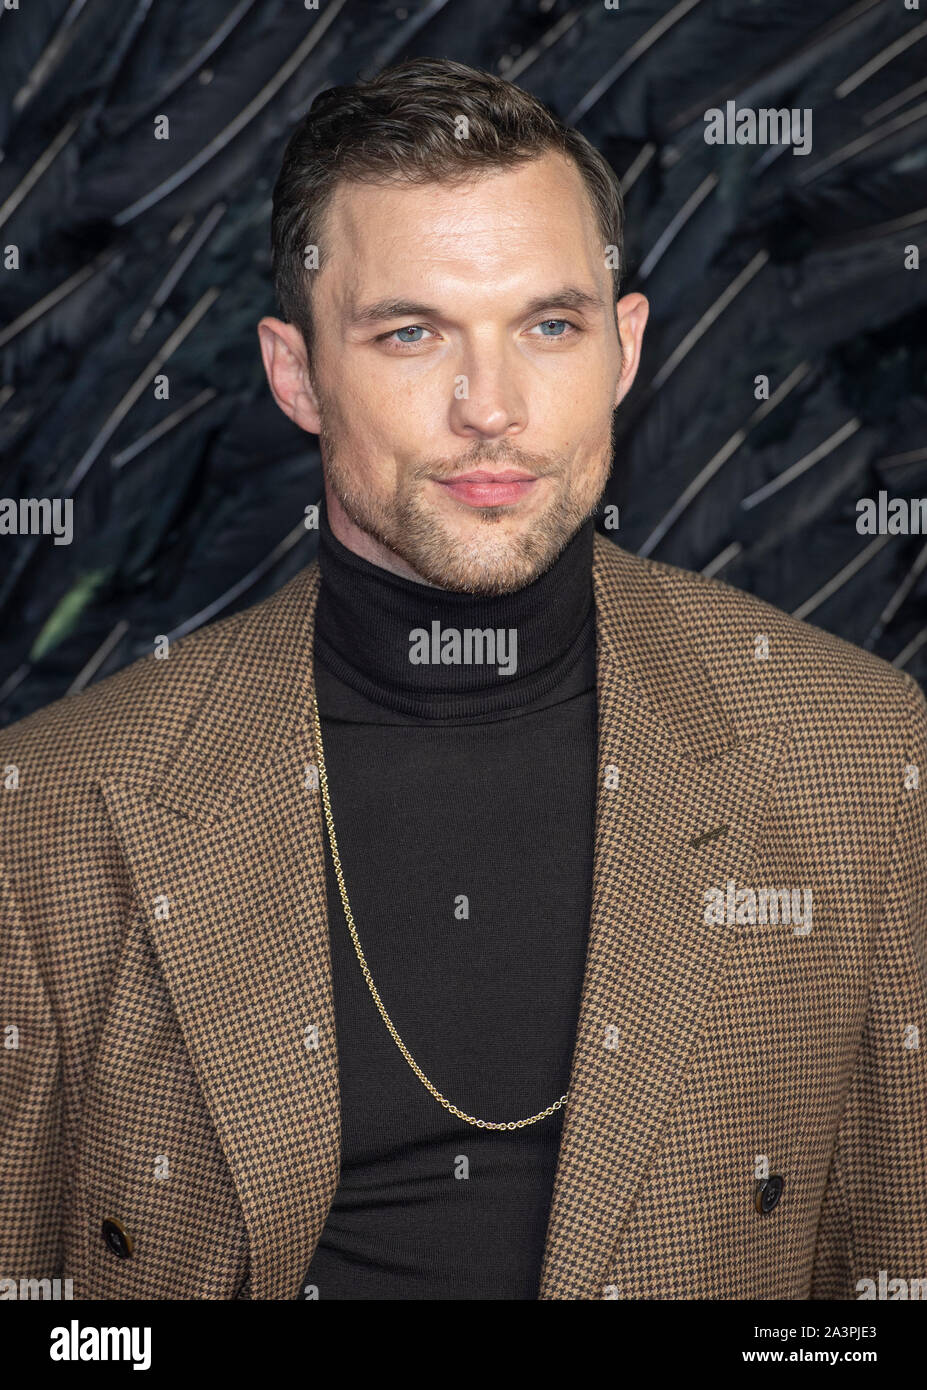 LONDON - ENGLAND - OCT 9. Ed Skrien attends the ‘Maleficent: Mistress of Evil’ European Premiere at the BFI Imax, Waterloo, London, England on the 9th October 2019. Gary Mitchell/Alamy Live News Stock Photo